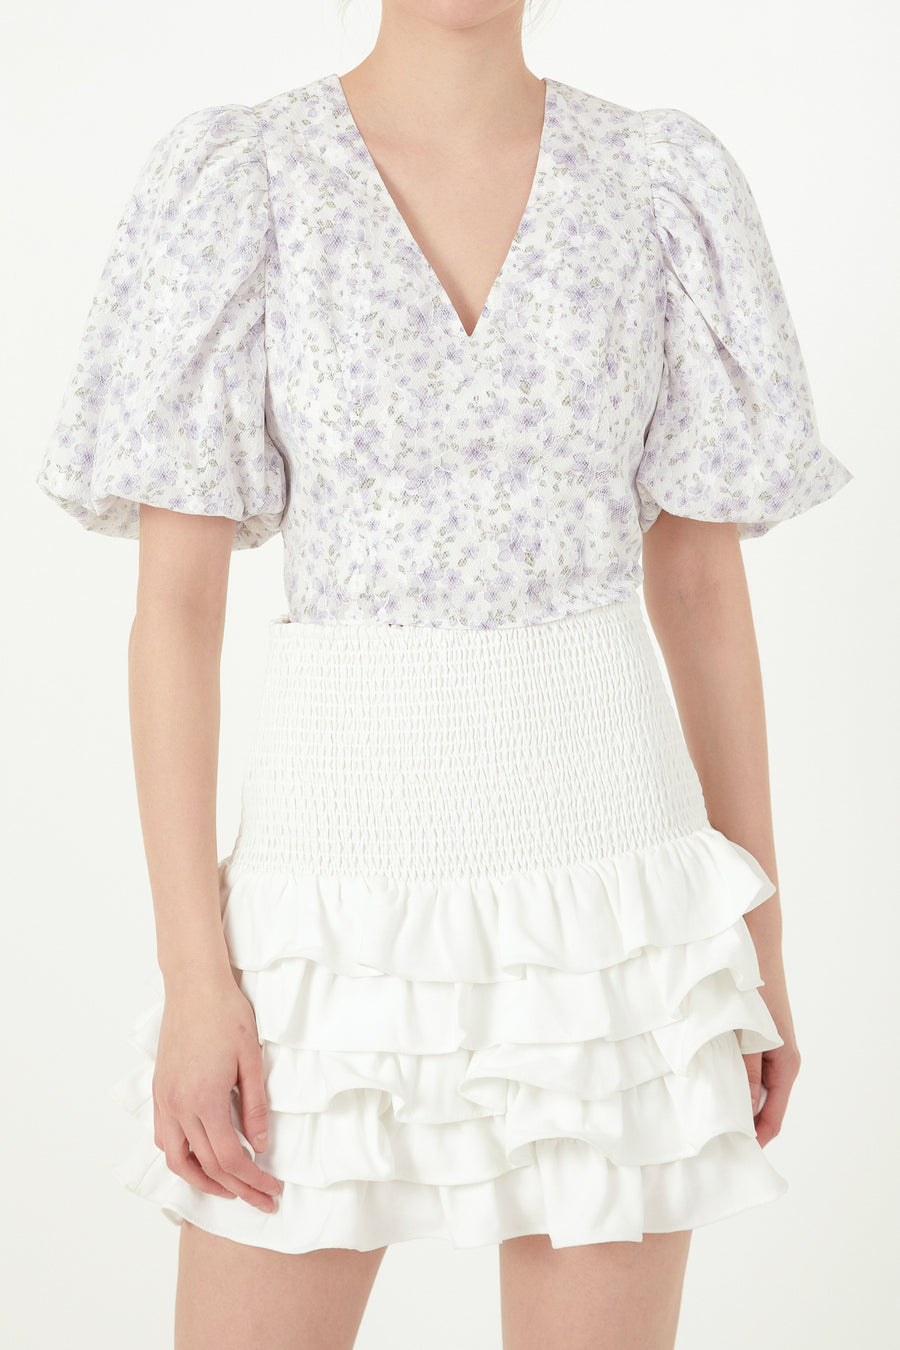 Floral Balloon Sleeve Top with Lace Texture